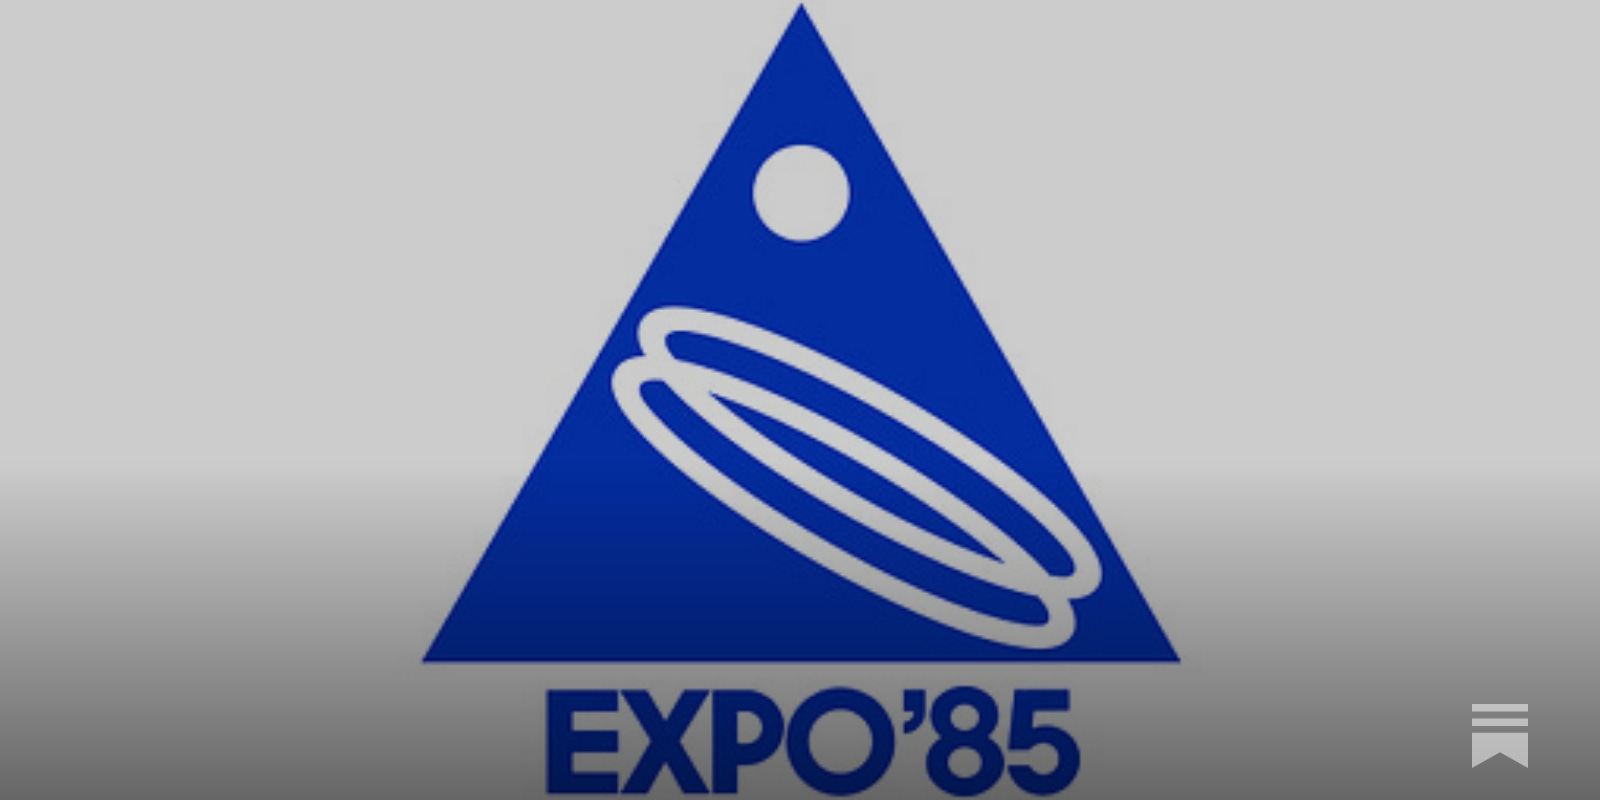 Uncovered, the story of the Expo '85 logo – Logo Histories